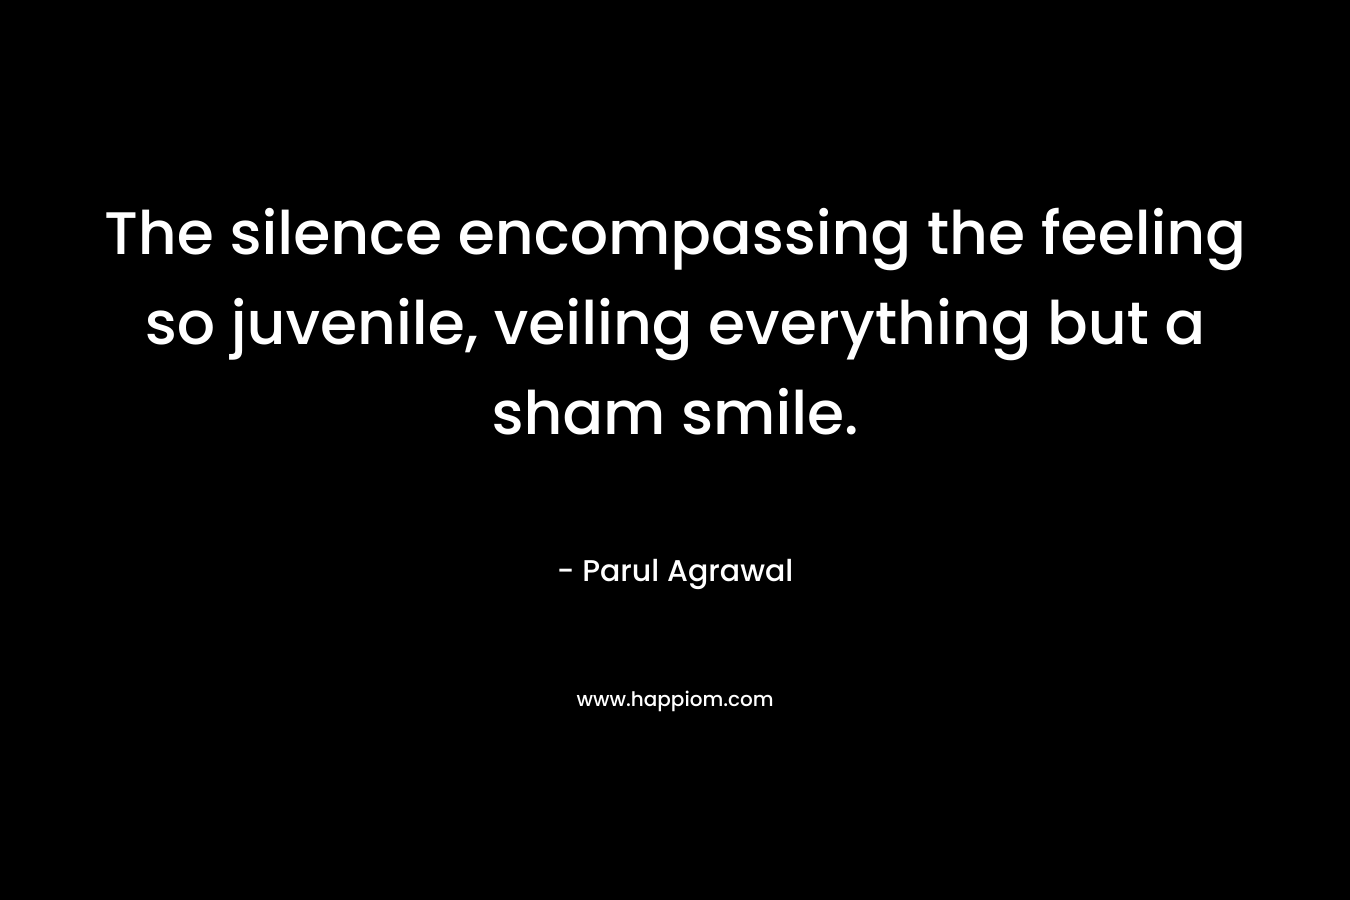 The silence encompassing the feeling so juvenile, veiling everything but a sham smile. – Parul Agrawal